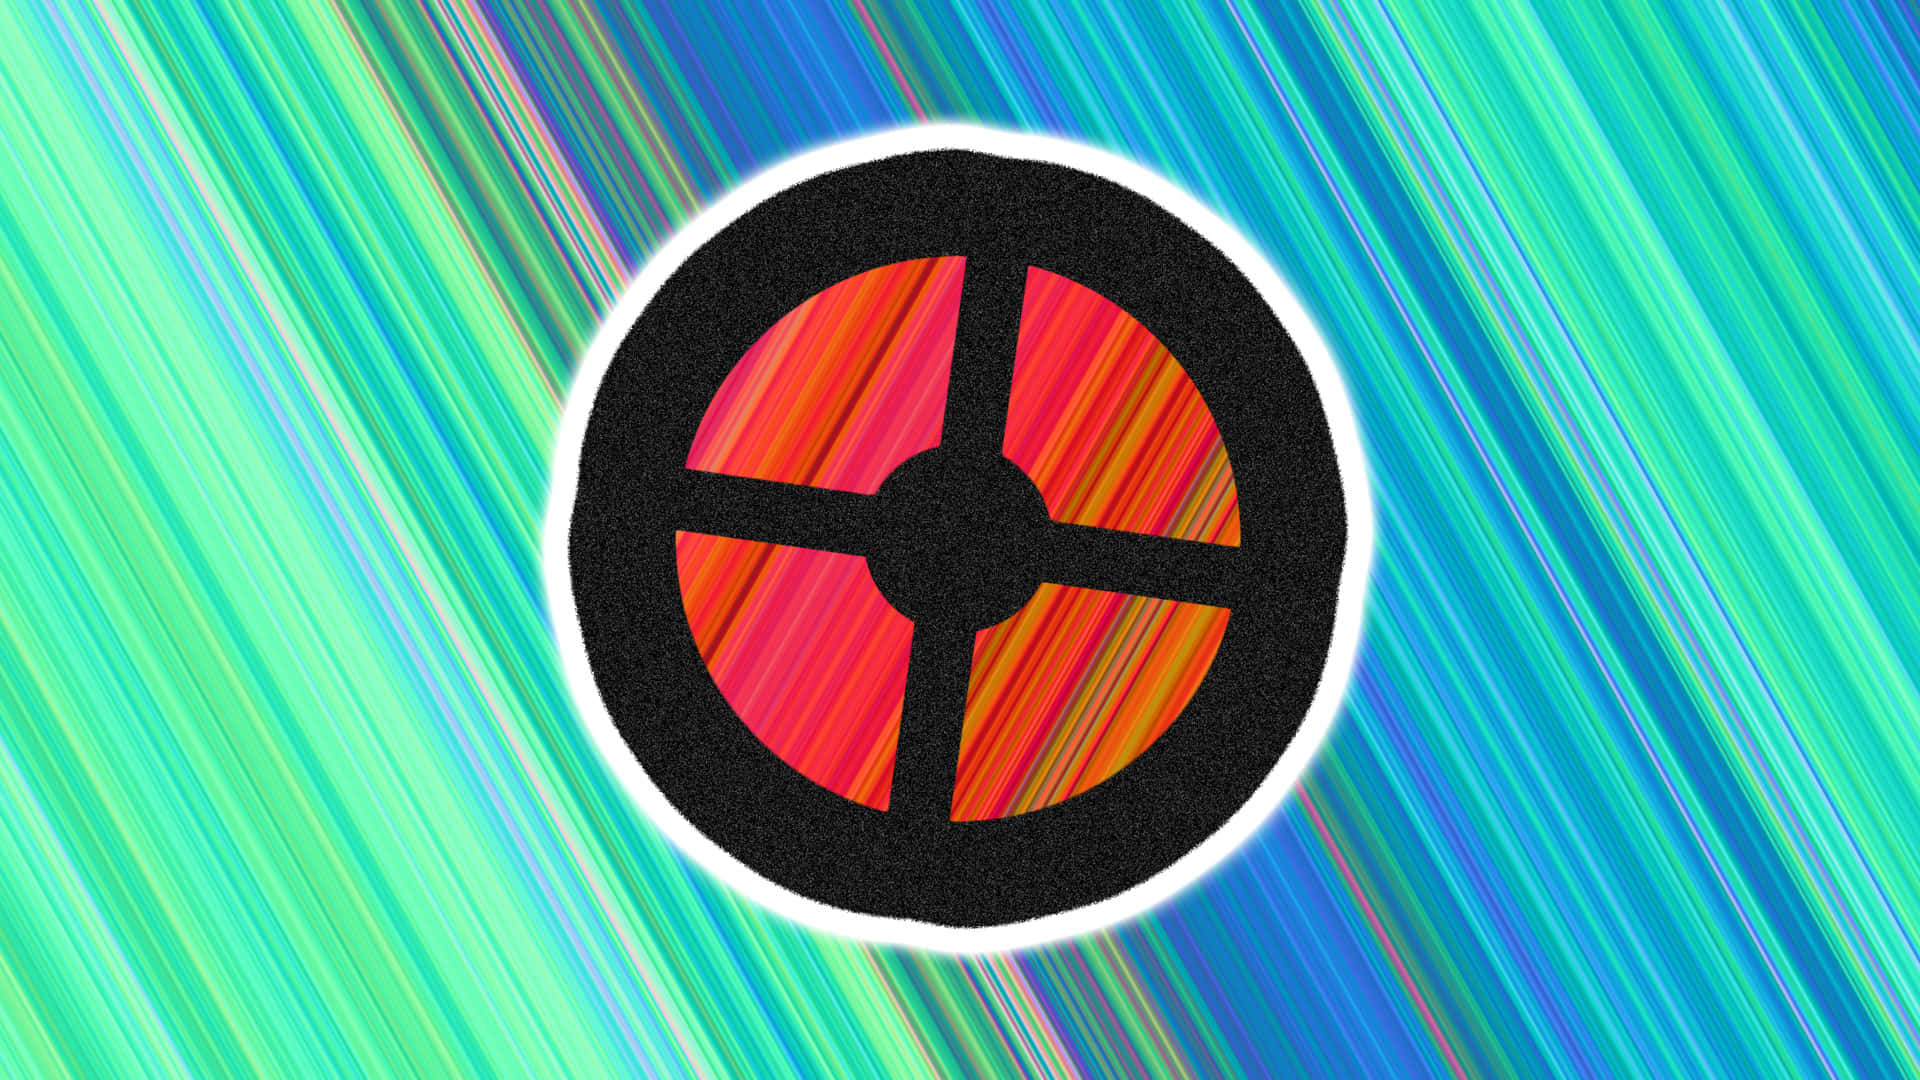 A Colorful Background With A Black And White Circle